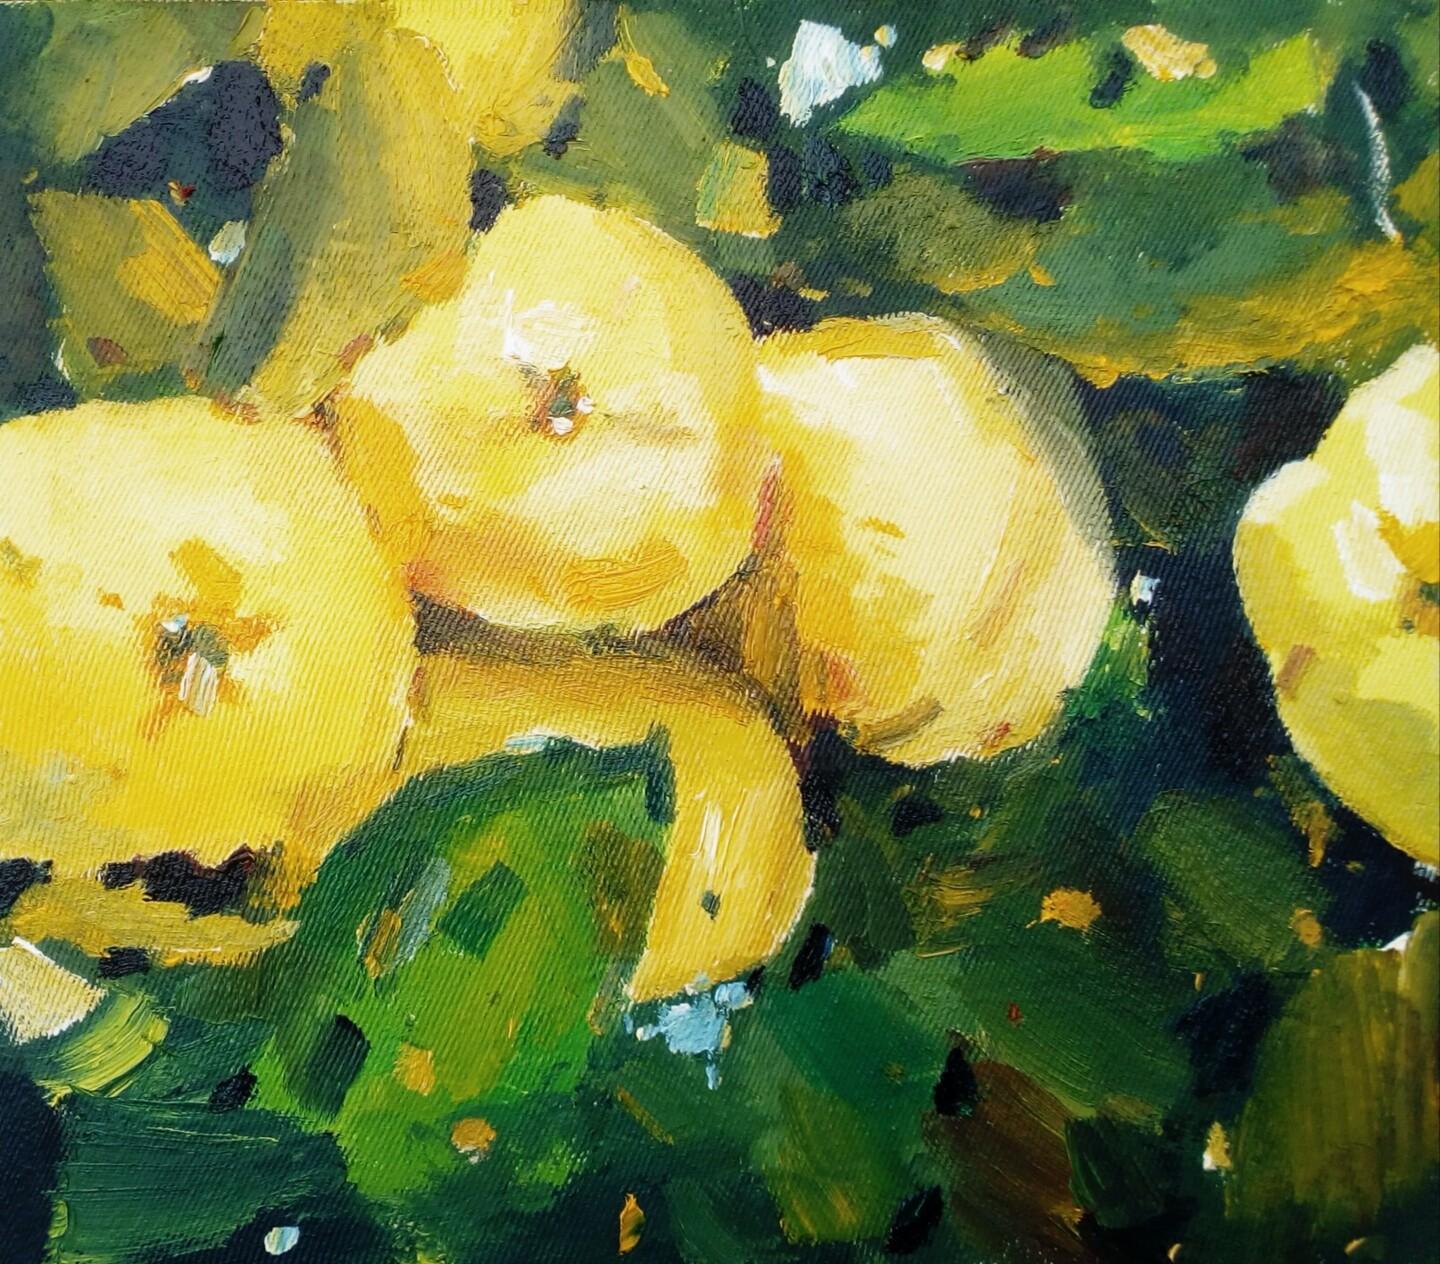 Unknown Still-Life Painting - Juicy quince fruit - Oil Painting by Dilshod Khudayorov, 2021